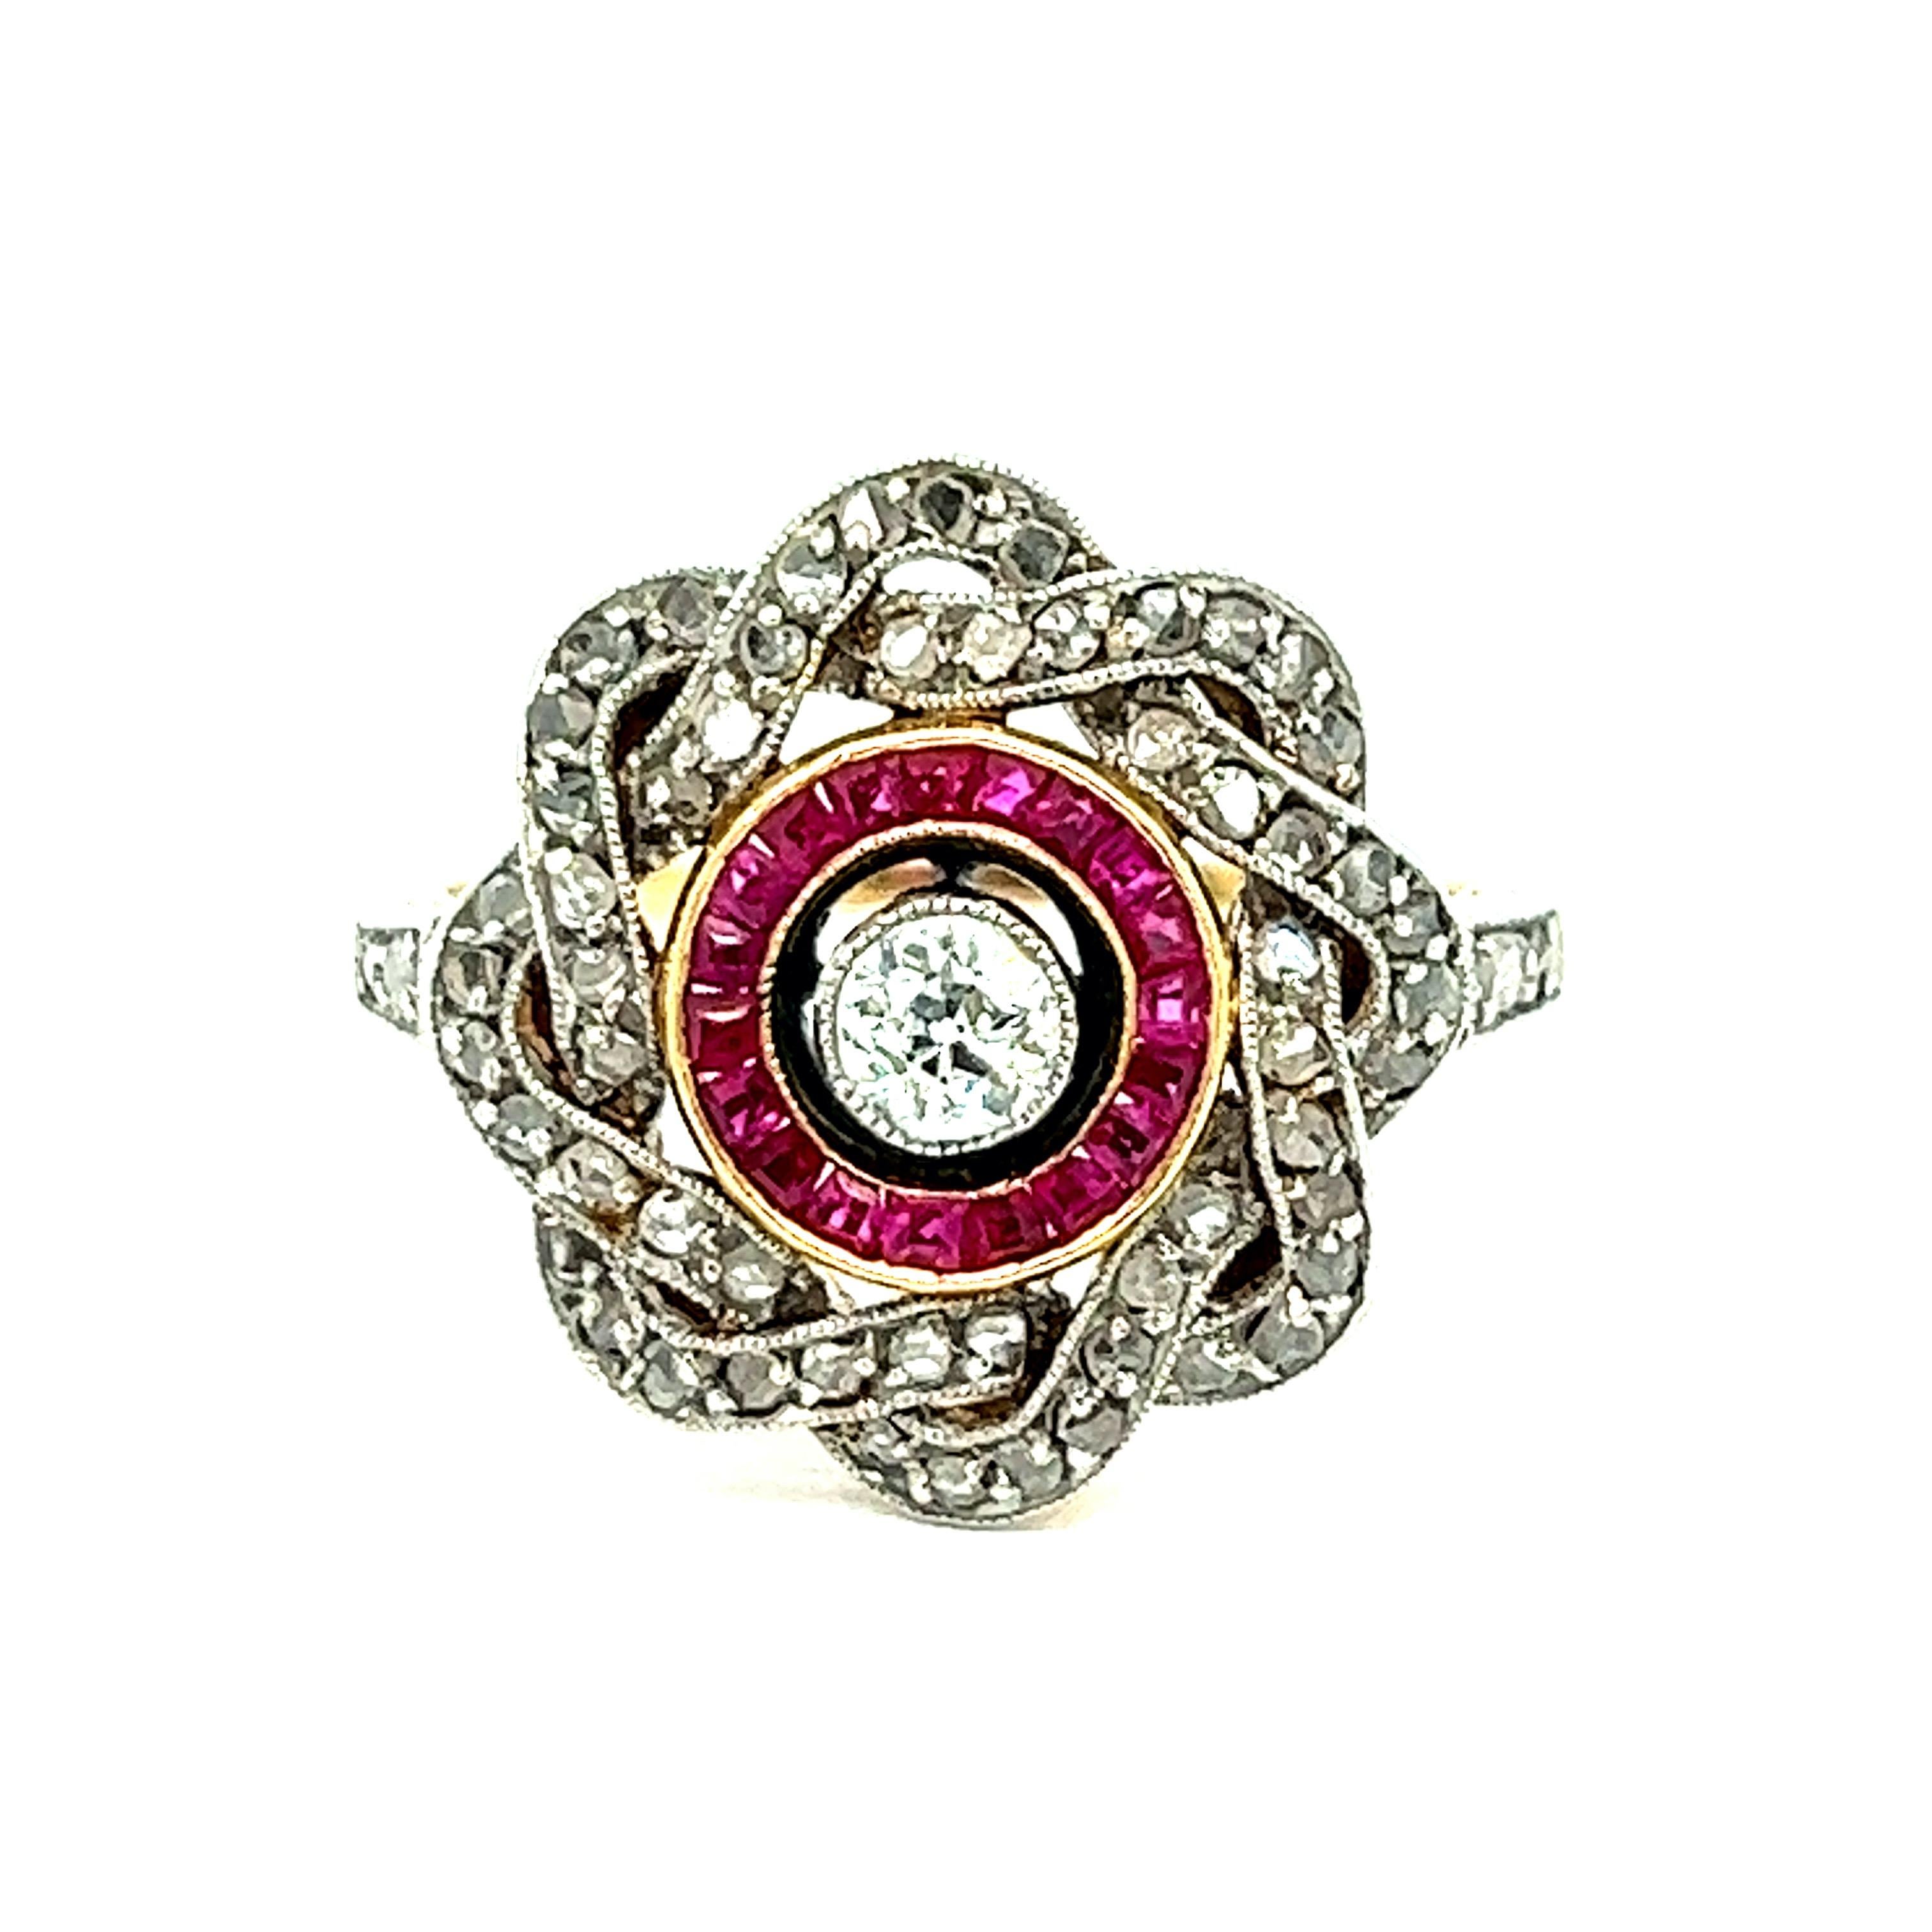 Edwardian diamond ruby platinum ring

Old European-cut center stone diamond of 0.25 carat, rose-cut diamonds, and square-cut rubies; 14 karat yellow gold and platinum

Size: 5.75 US; top width 0.75 inch, length 0.63 inch
Total weight: 4.6 grams